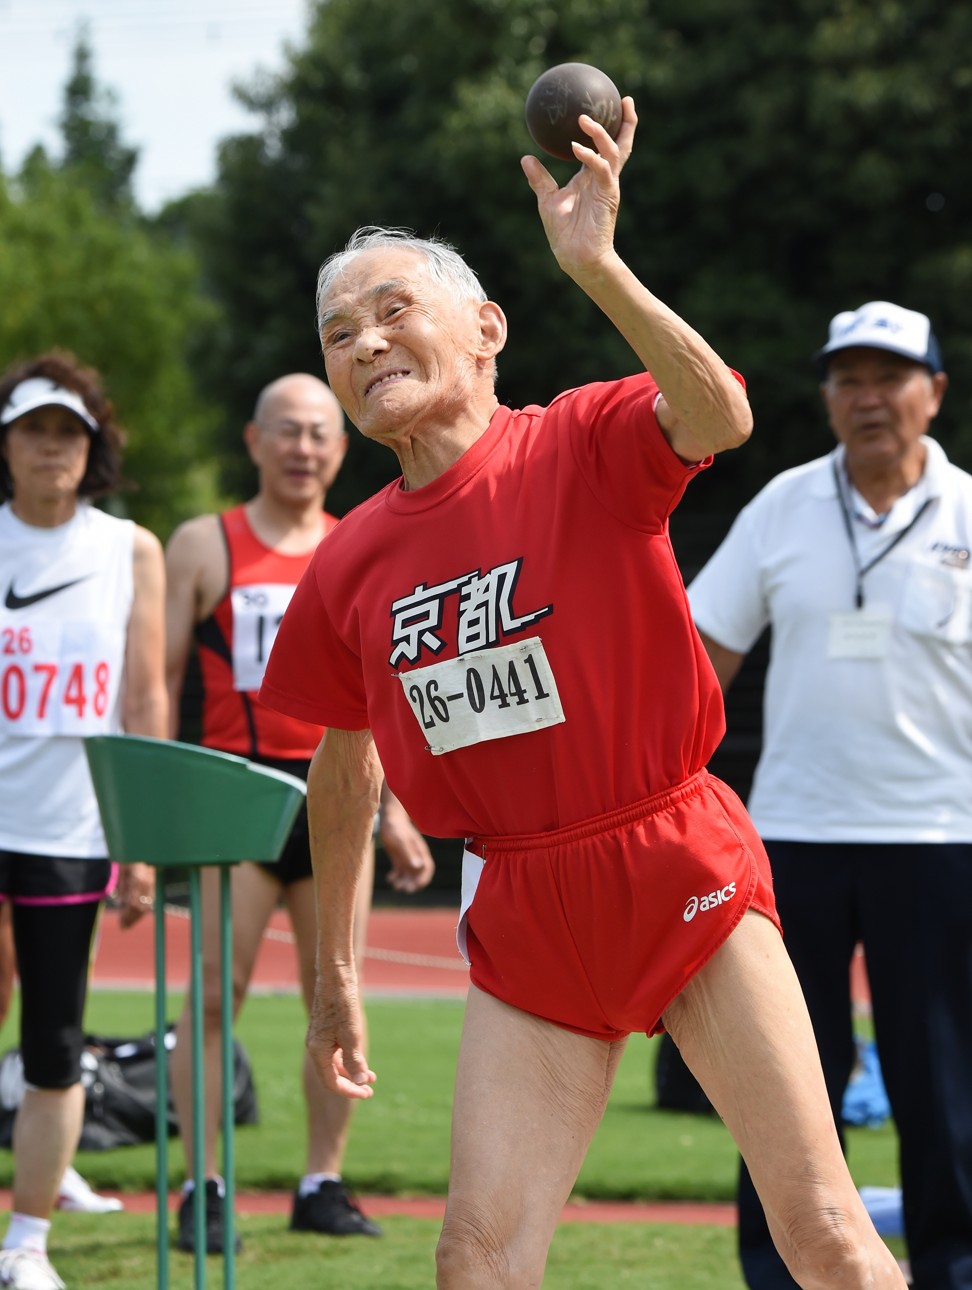 Hidekichi Miyazaki, 105, throws a shot put after running with other competitors all over 80 years of age in a 100m sprint in the Kyoto Masters in Kyoto, western Japan. Photo: AFP